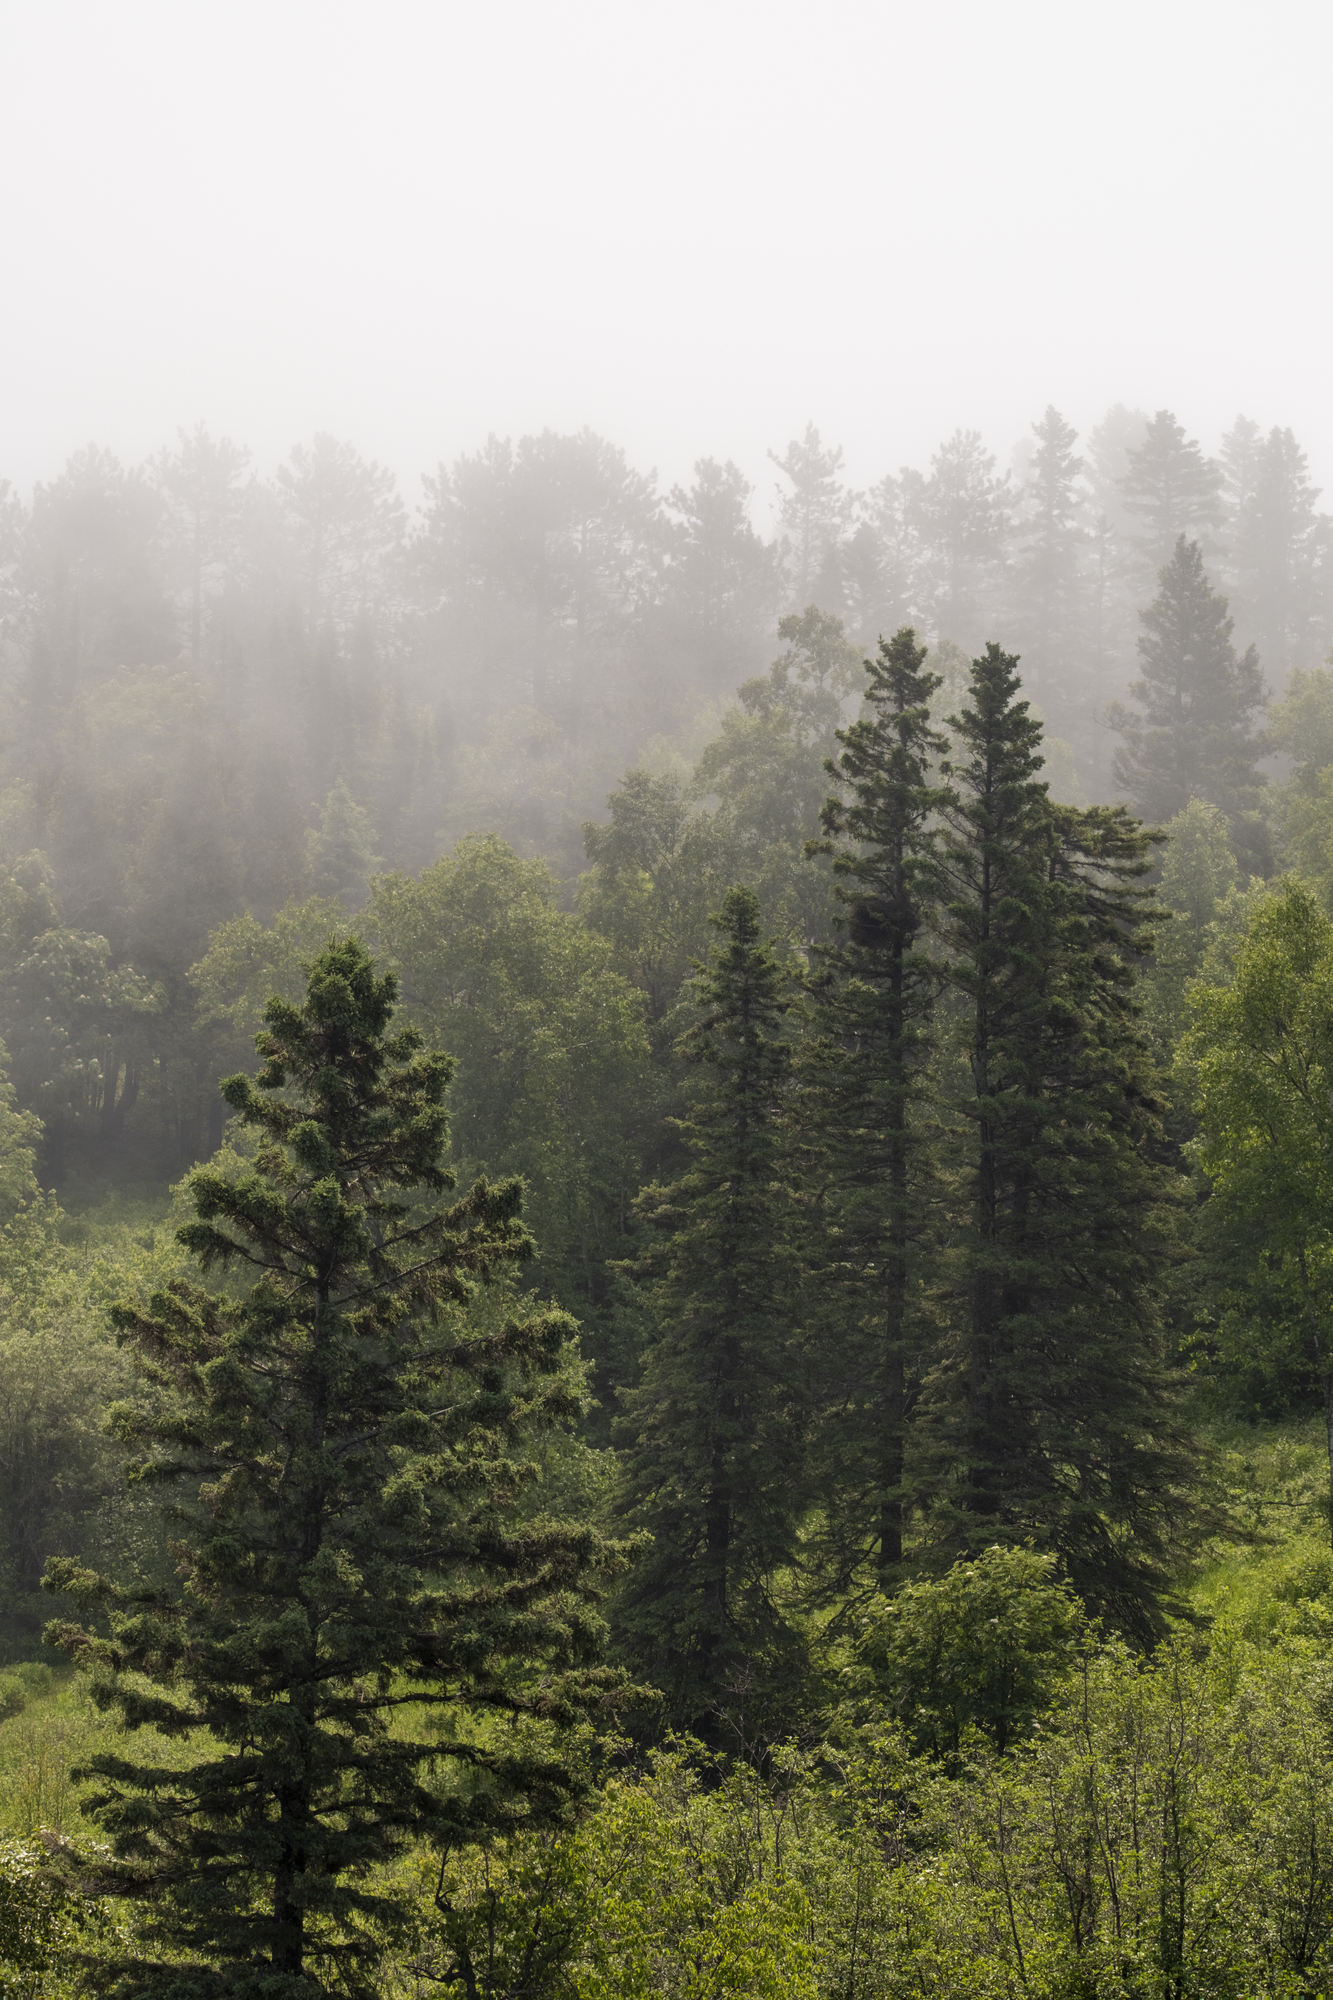 Thick fog shrouds tall conifer trees in a forest.